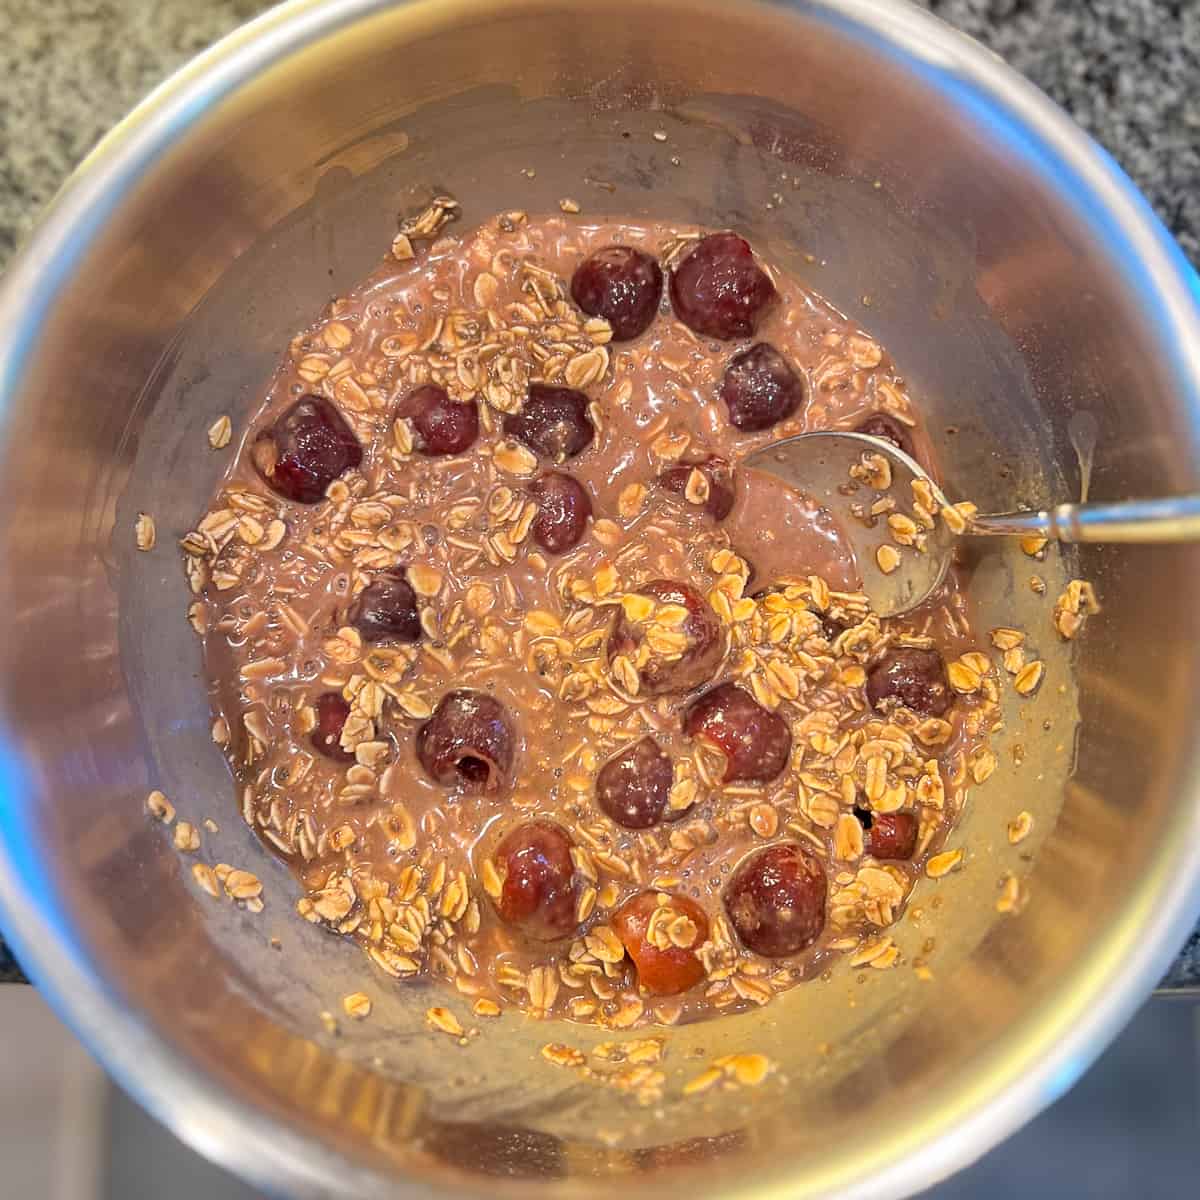 top view of oat mixture with cherries and a spoon on the side